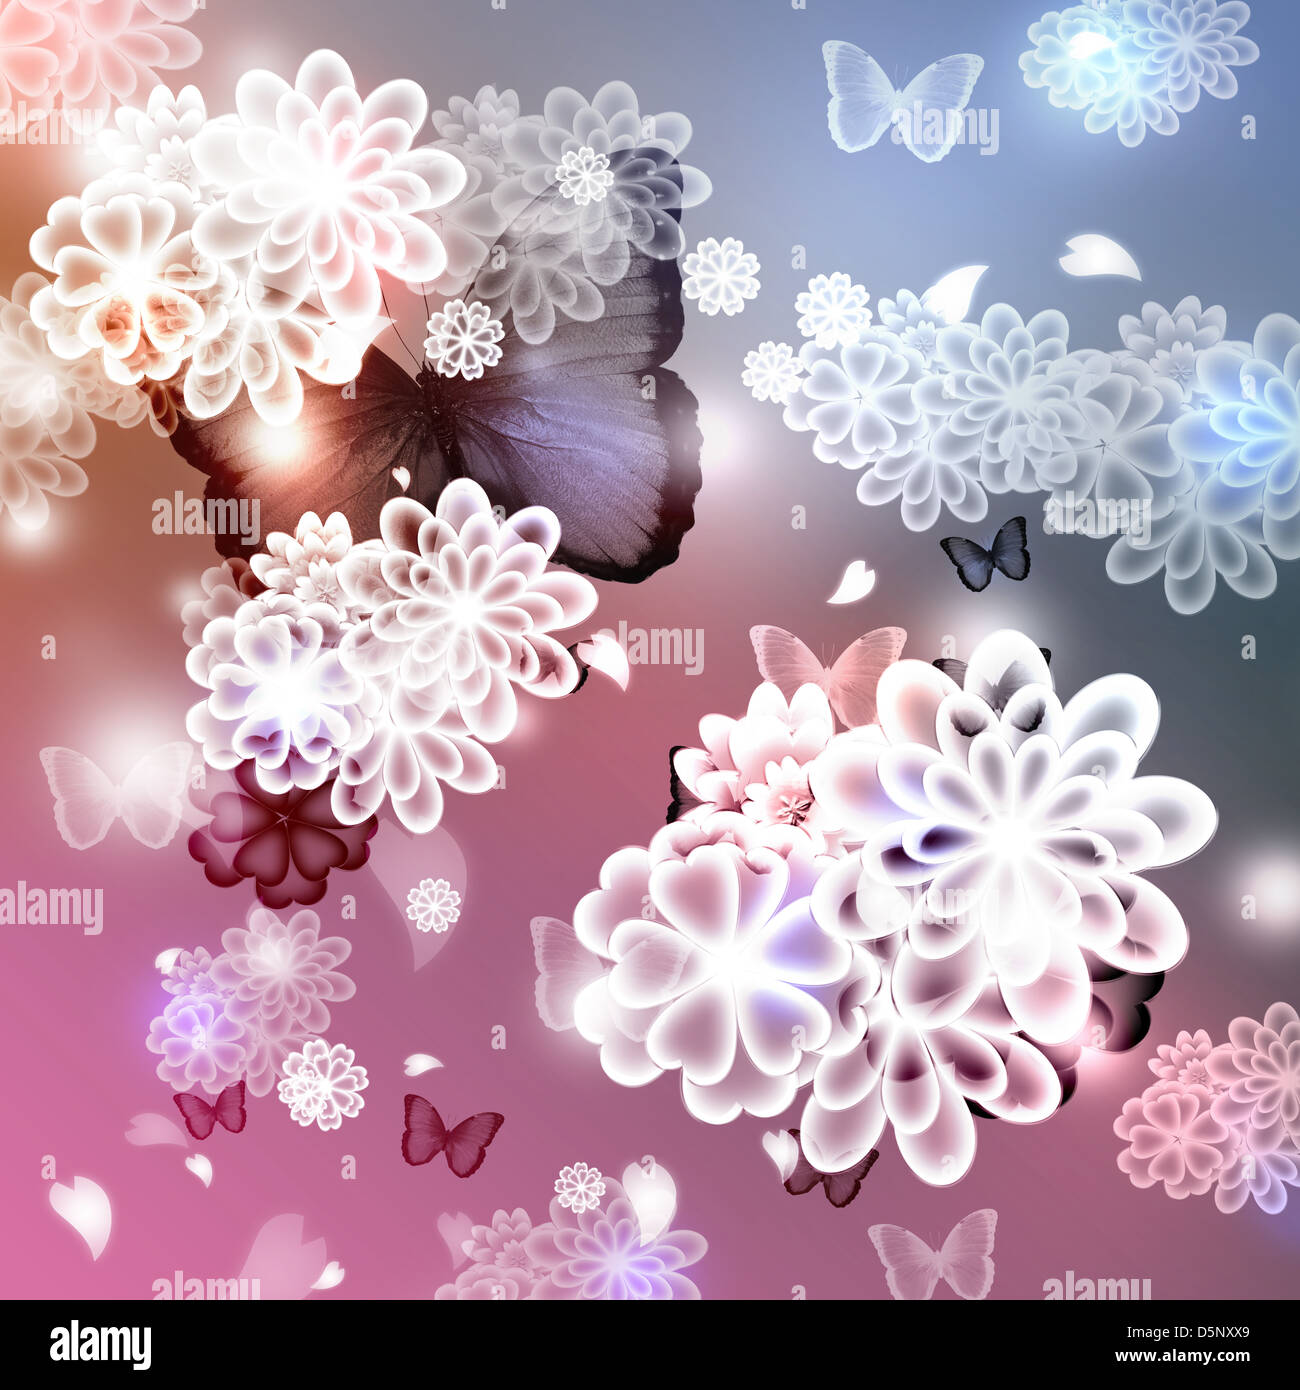 Blossoms and butterflies pastel illustration Stock Photo